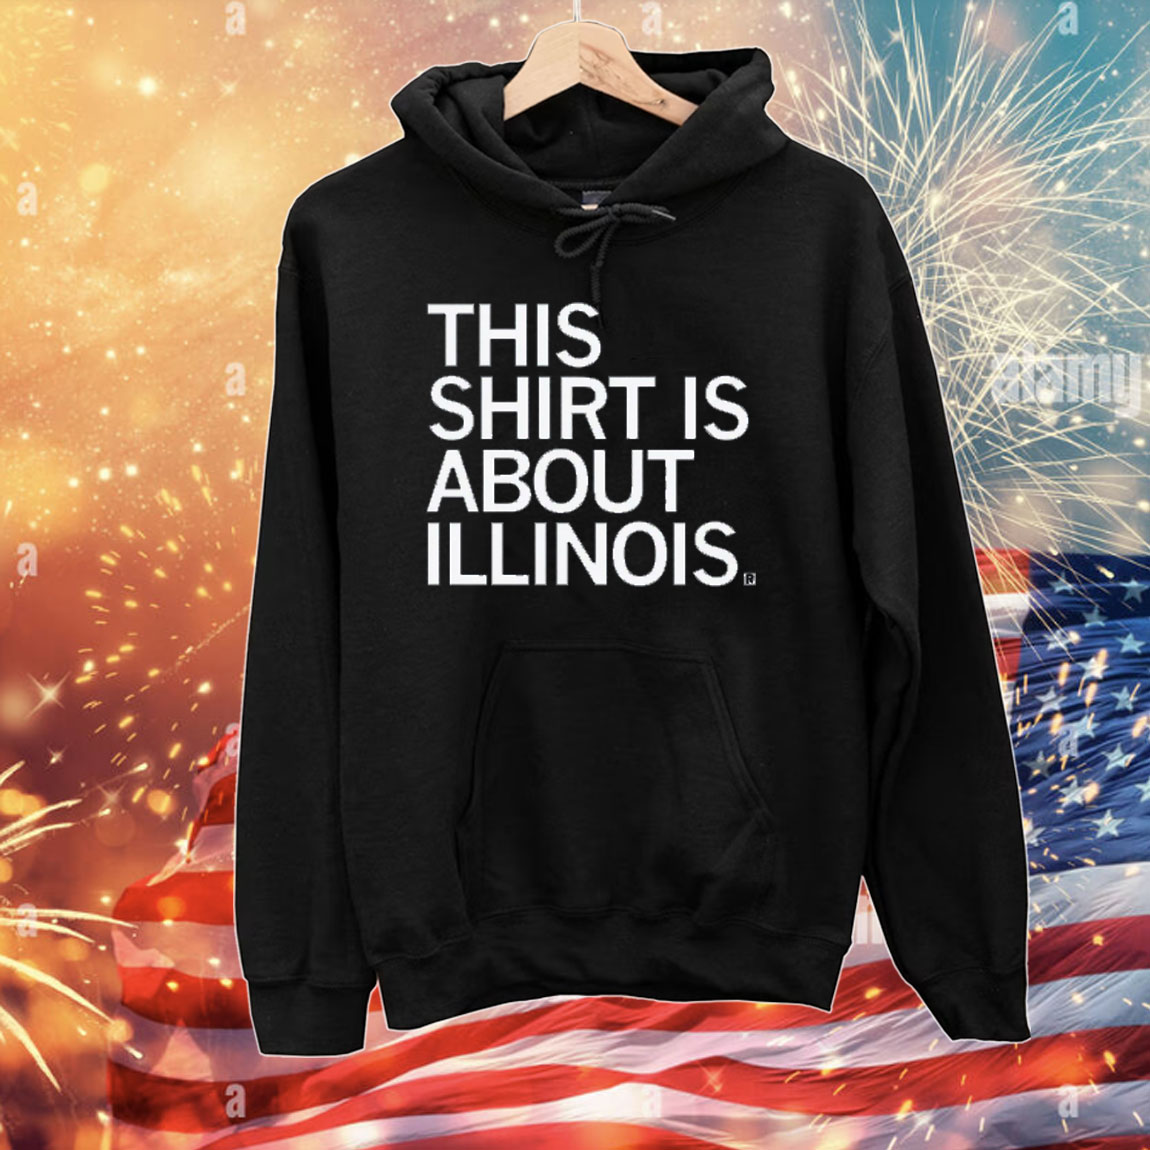 This Shirt Is About Illinois T-Shirt